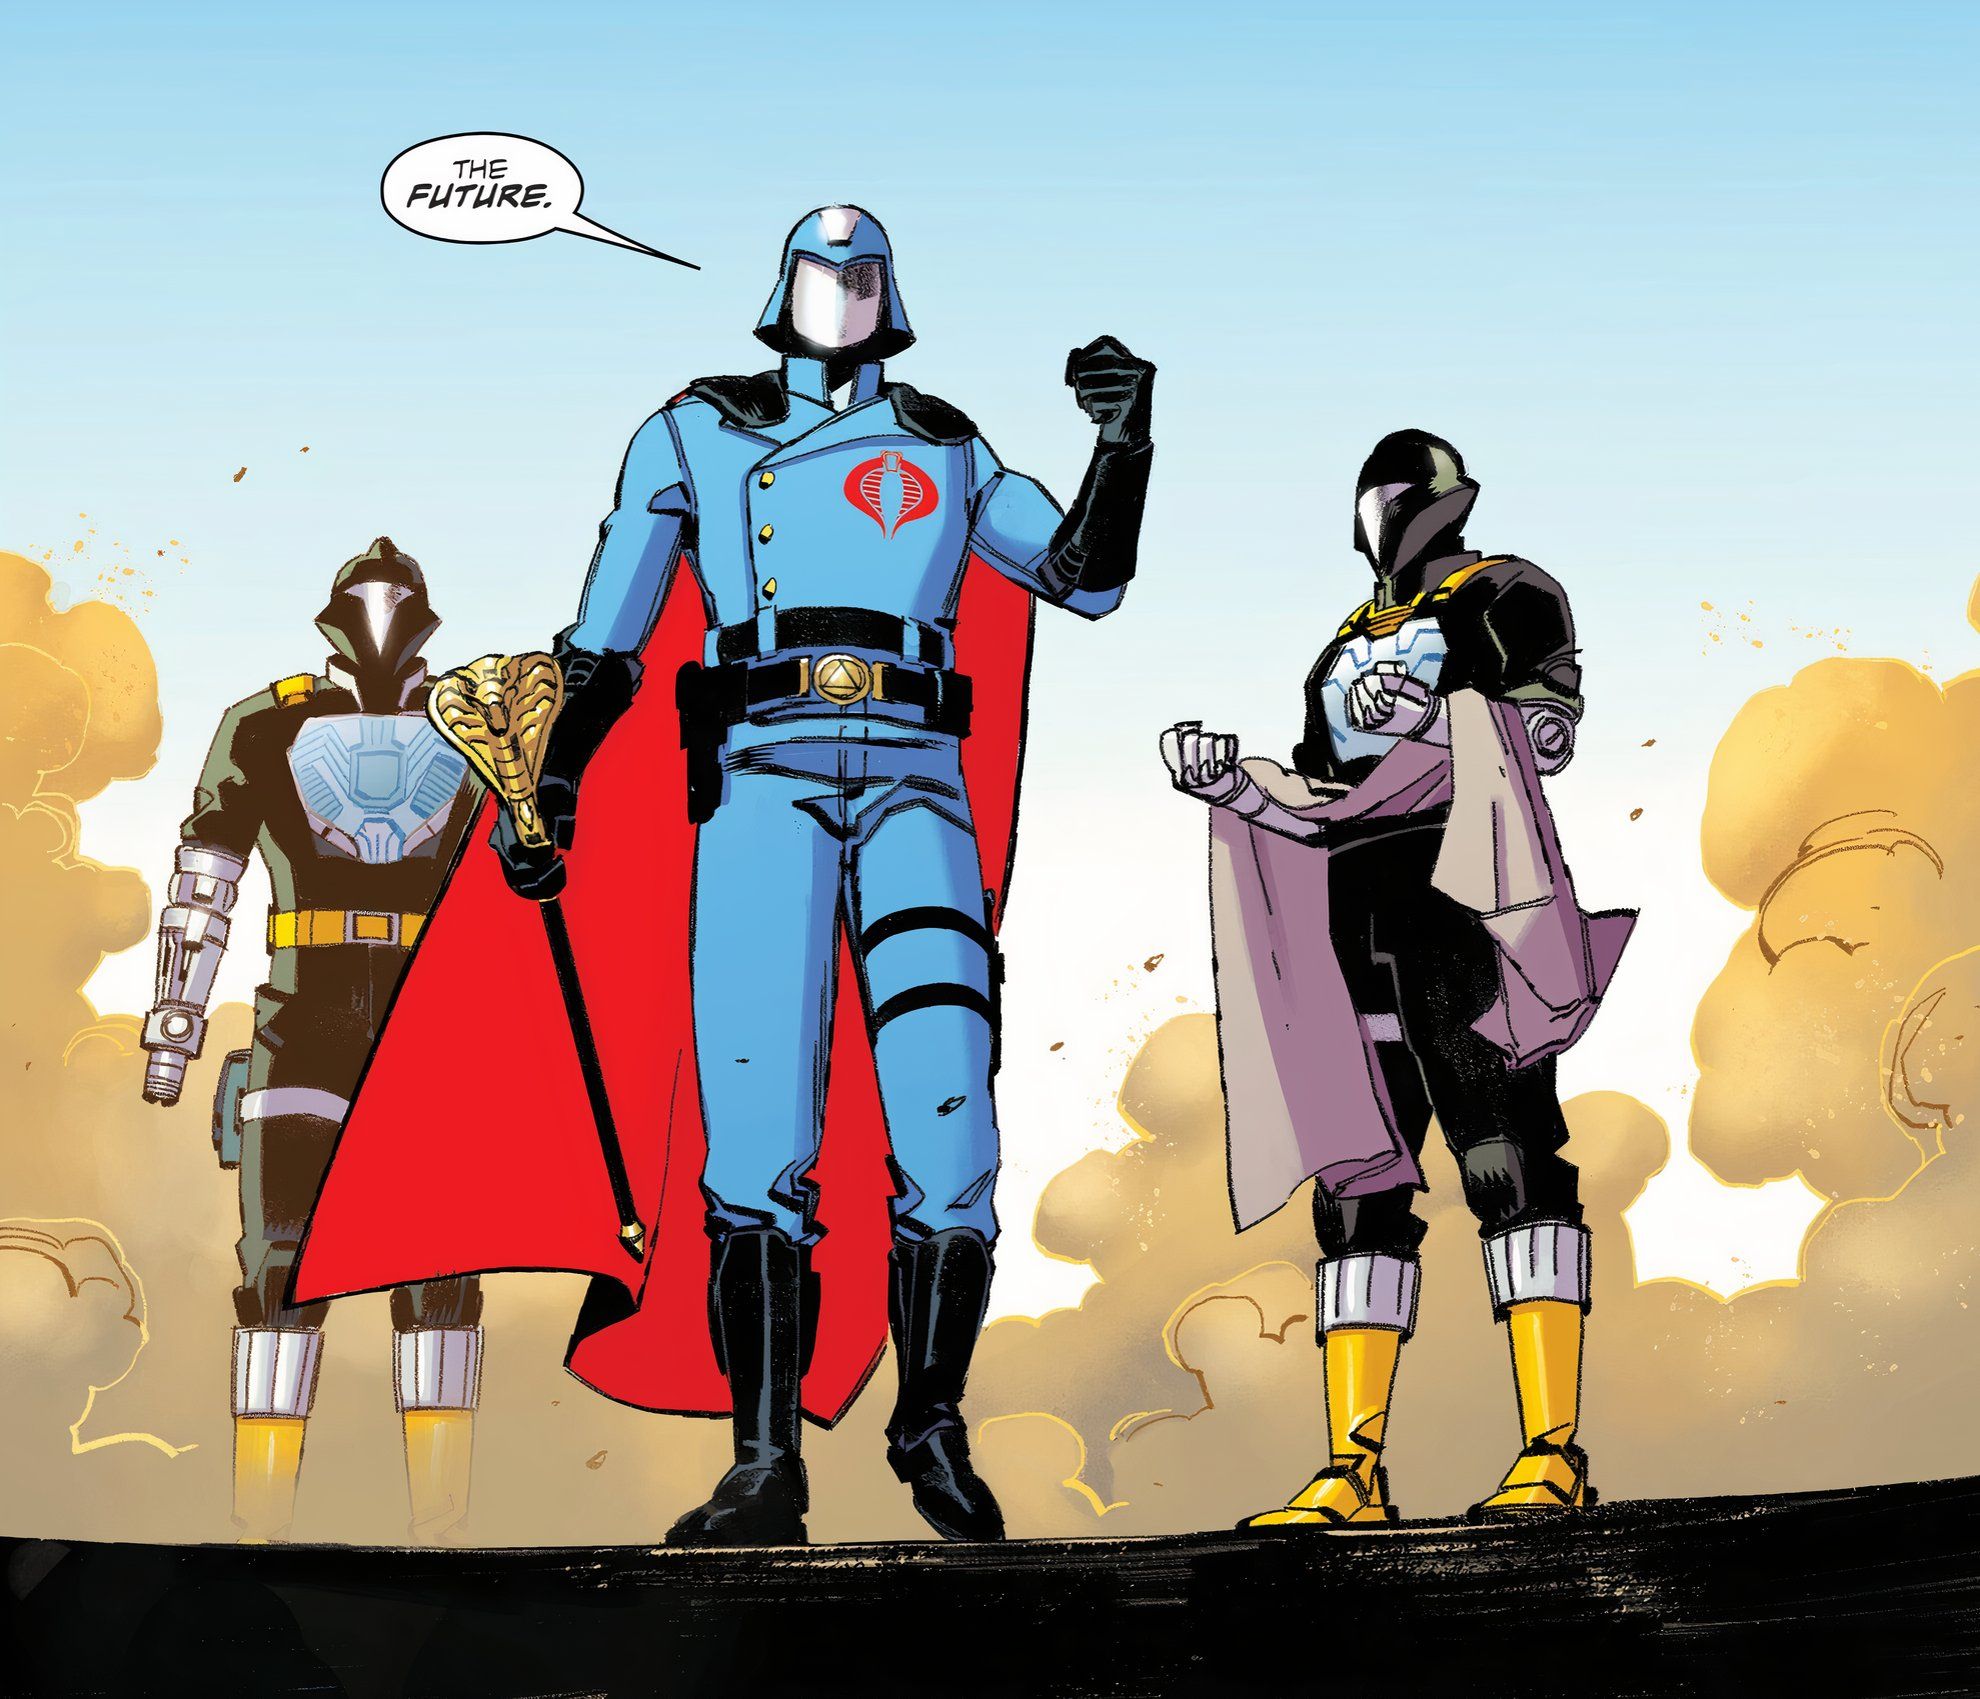 Cobra Commander #5, Cobra Commander dons his iconic outfit and declares himself 